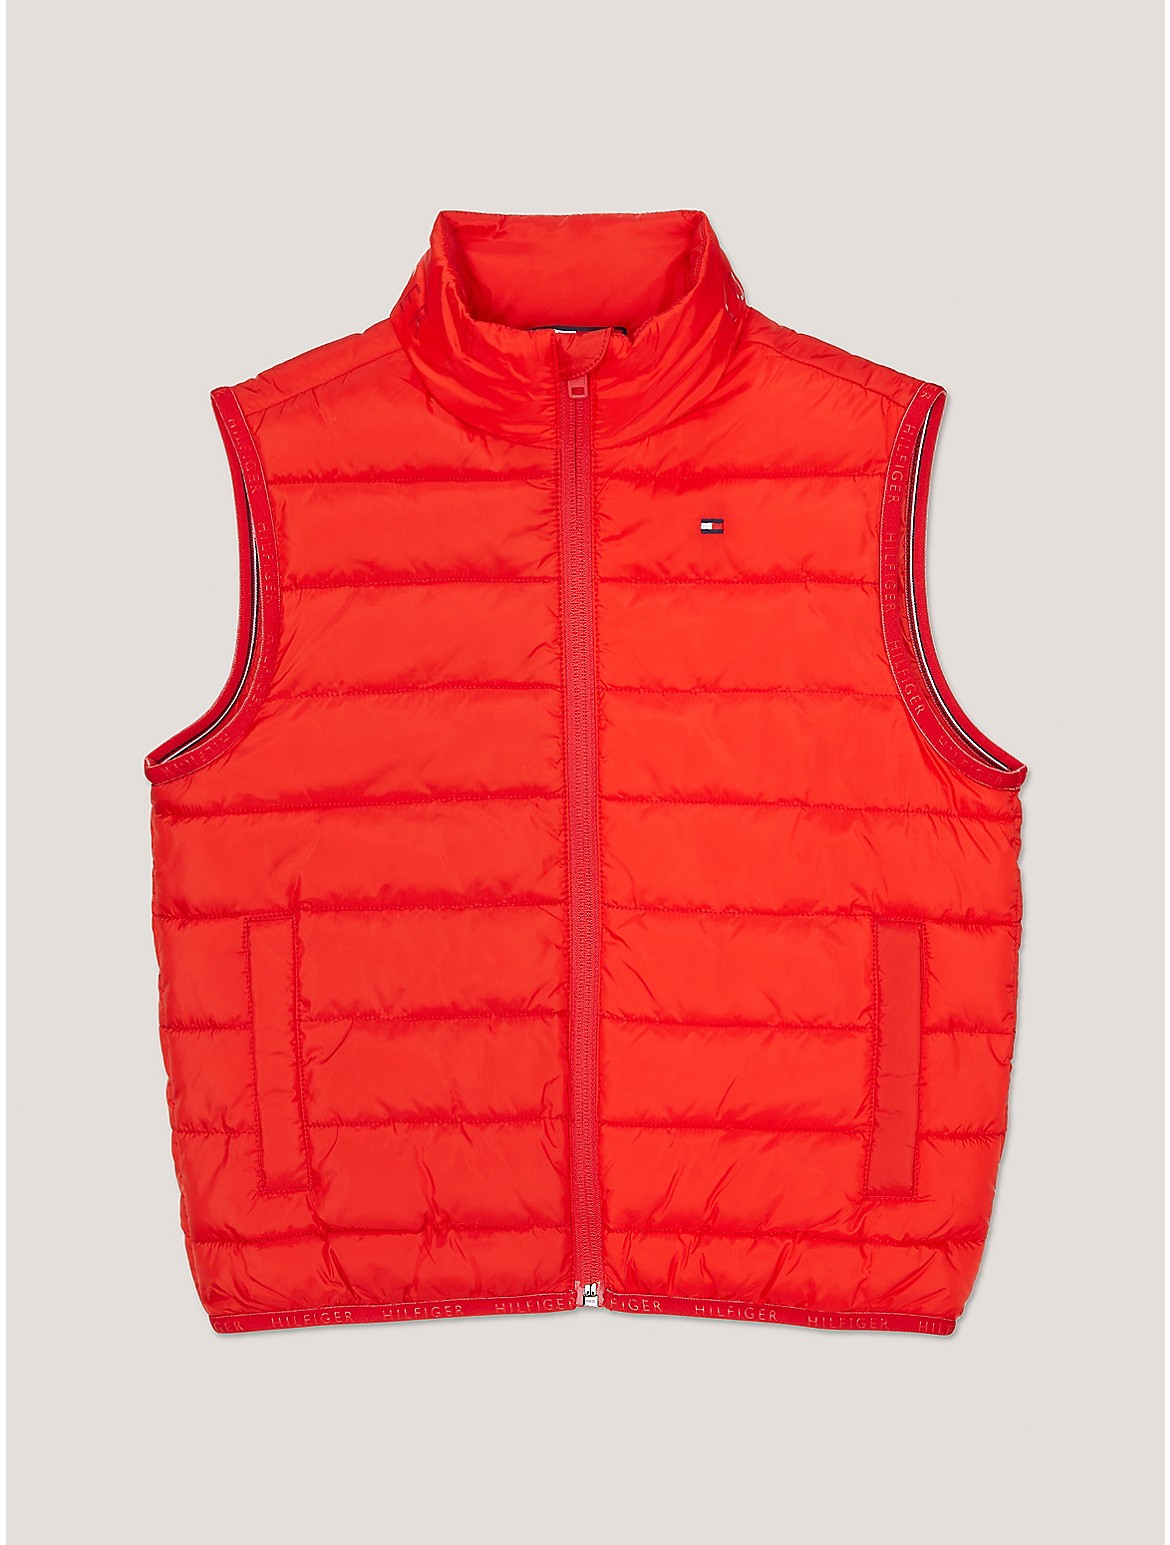 Tommy Hilfiger Boys' Kids' Insulated Vest - Red - XL